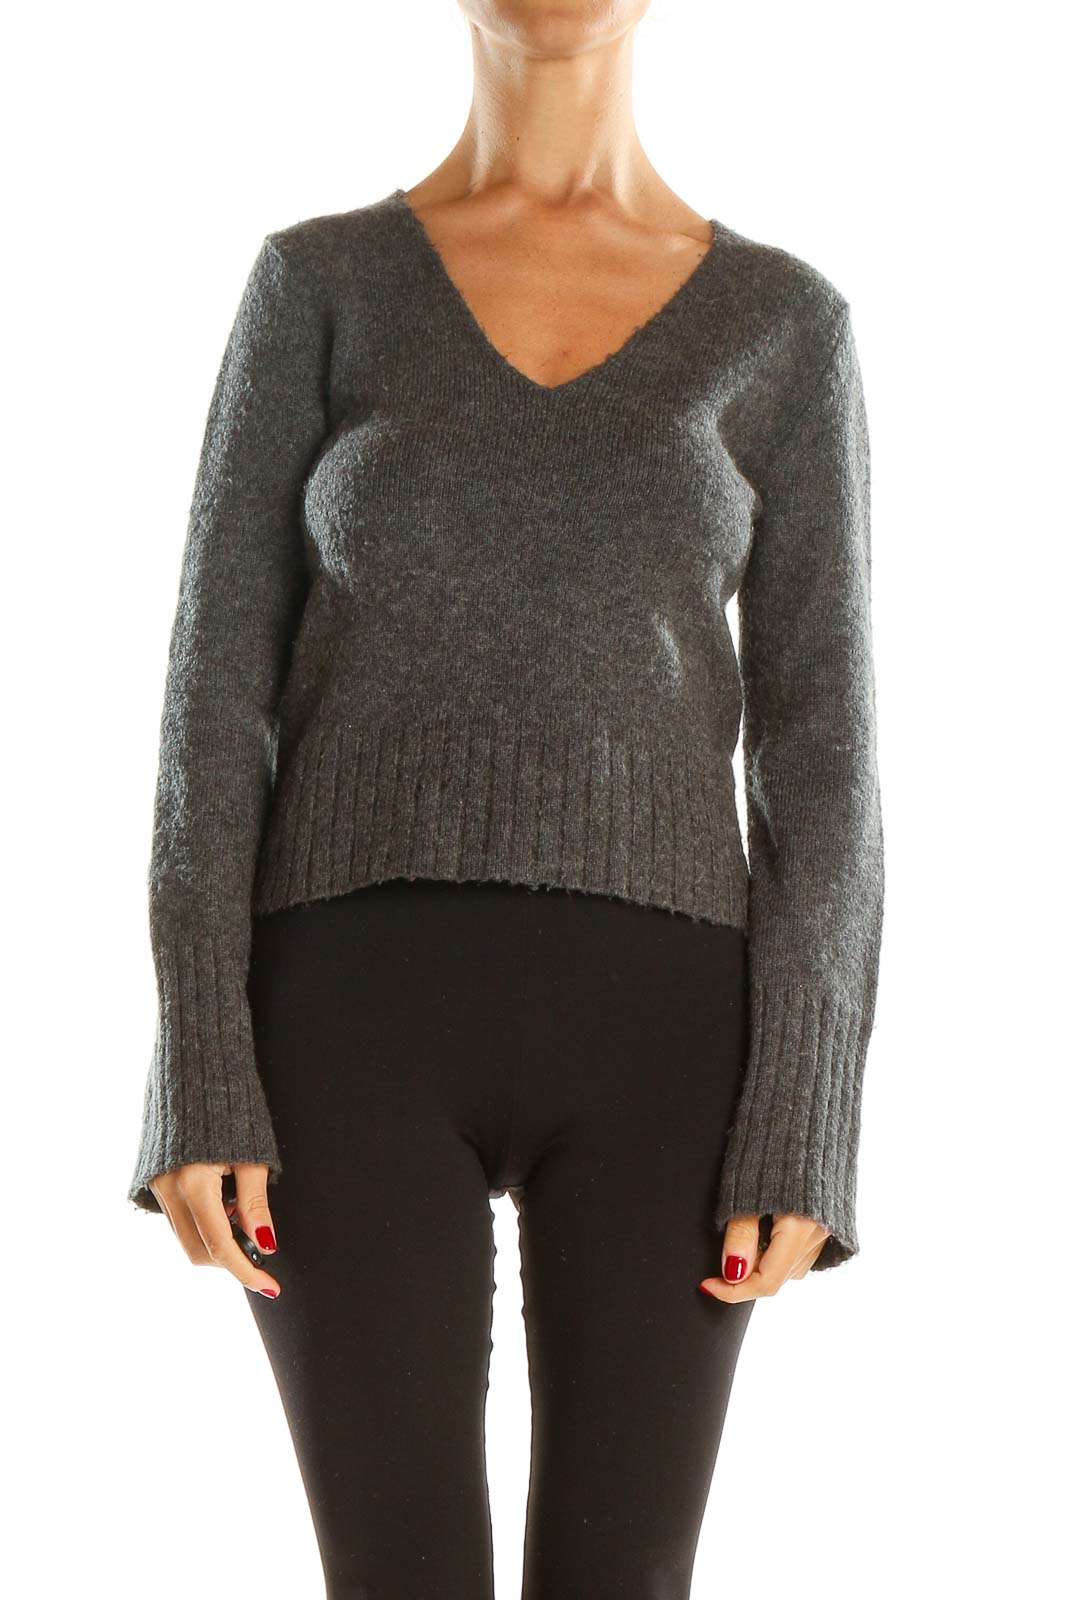 Gray Retro Cropped Sweater Front